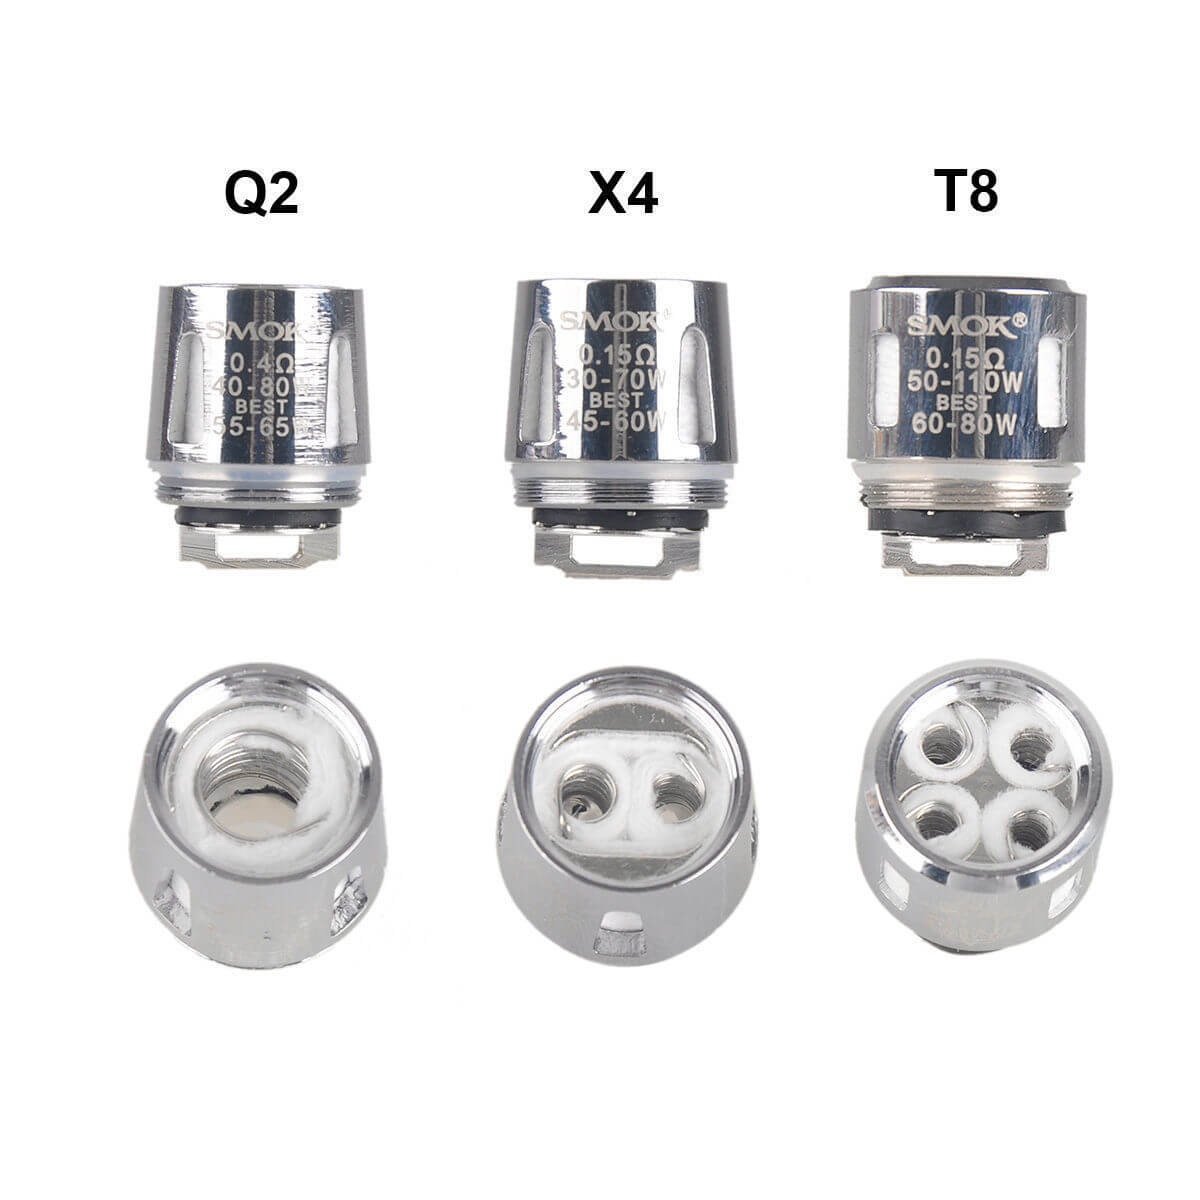 Underground Vapes Inc - SMOK - TFV8 BABY AND BIG BABY BEAST COILS - COIL